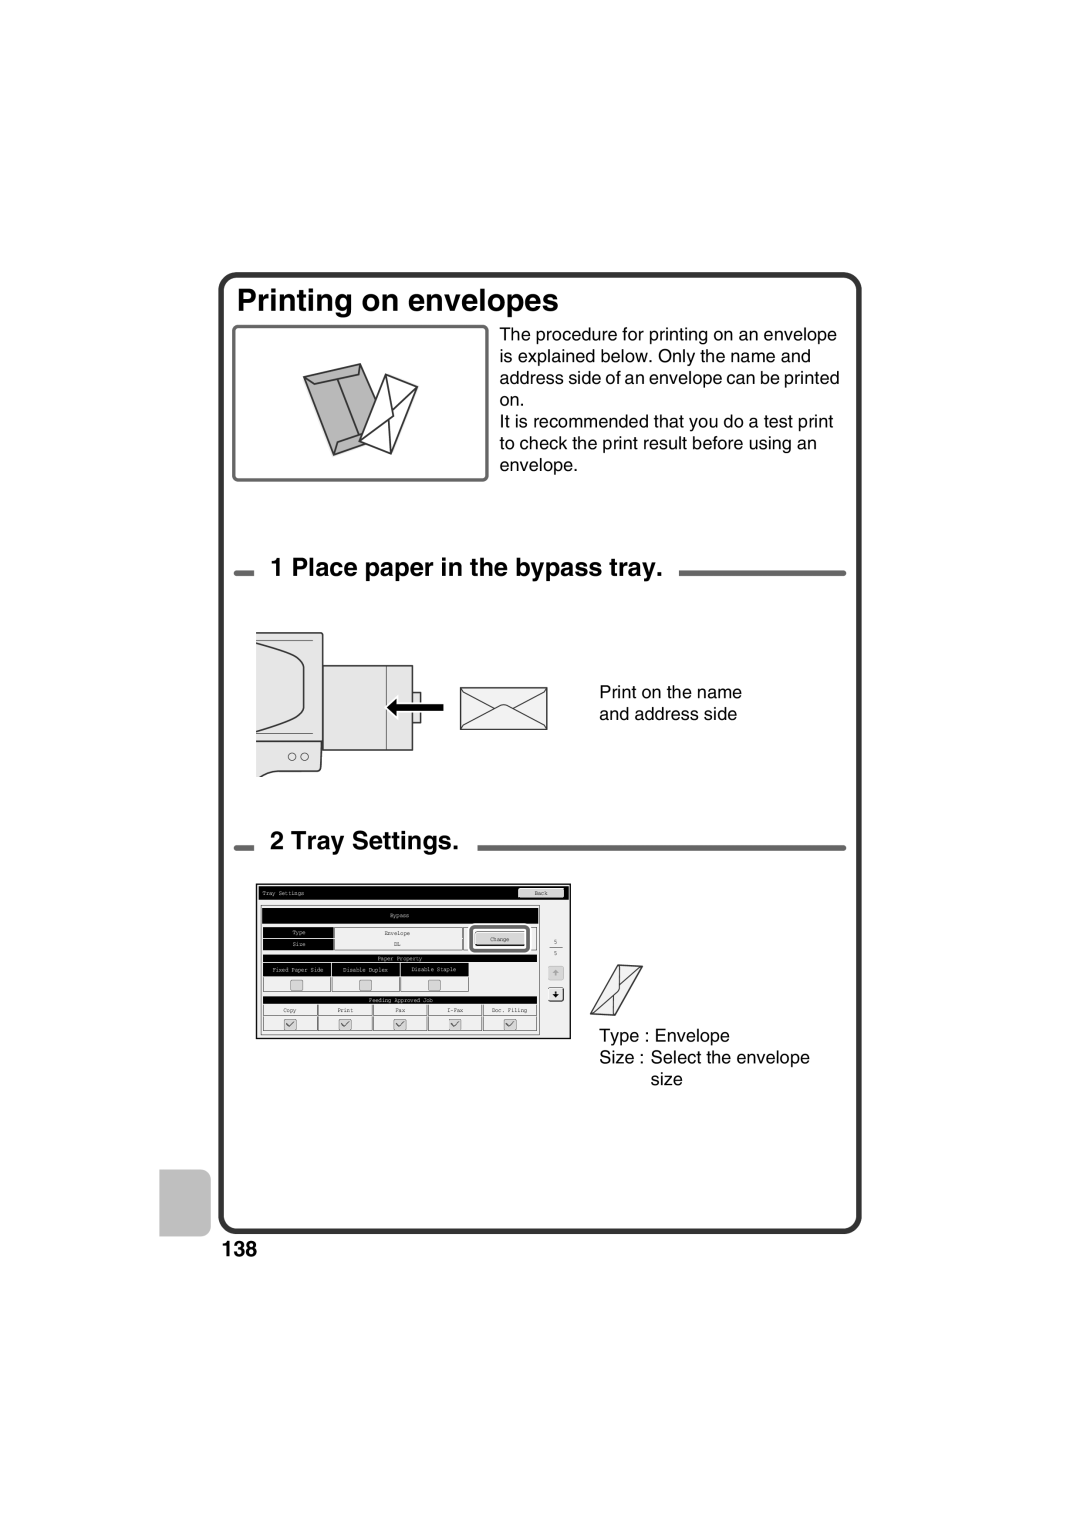 Sharp MX-C311, MX-C381 quick start Printing on envelopes, Place paper in the bypass tray, Tray Settings 